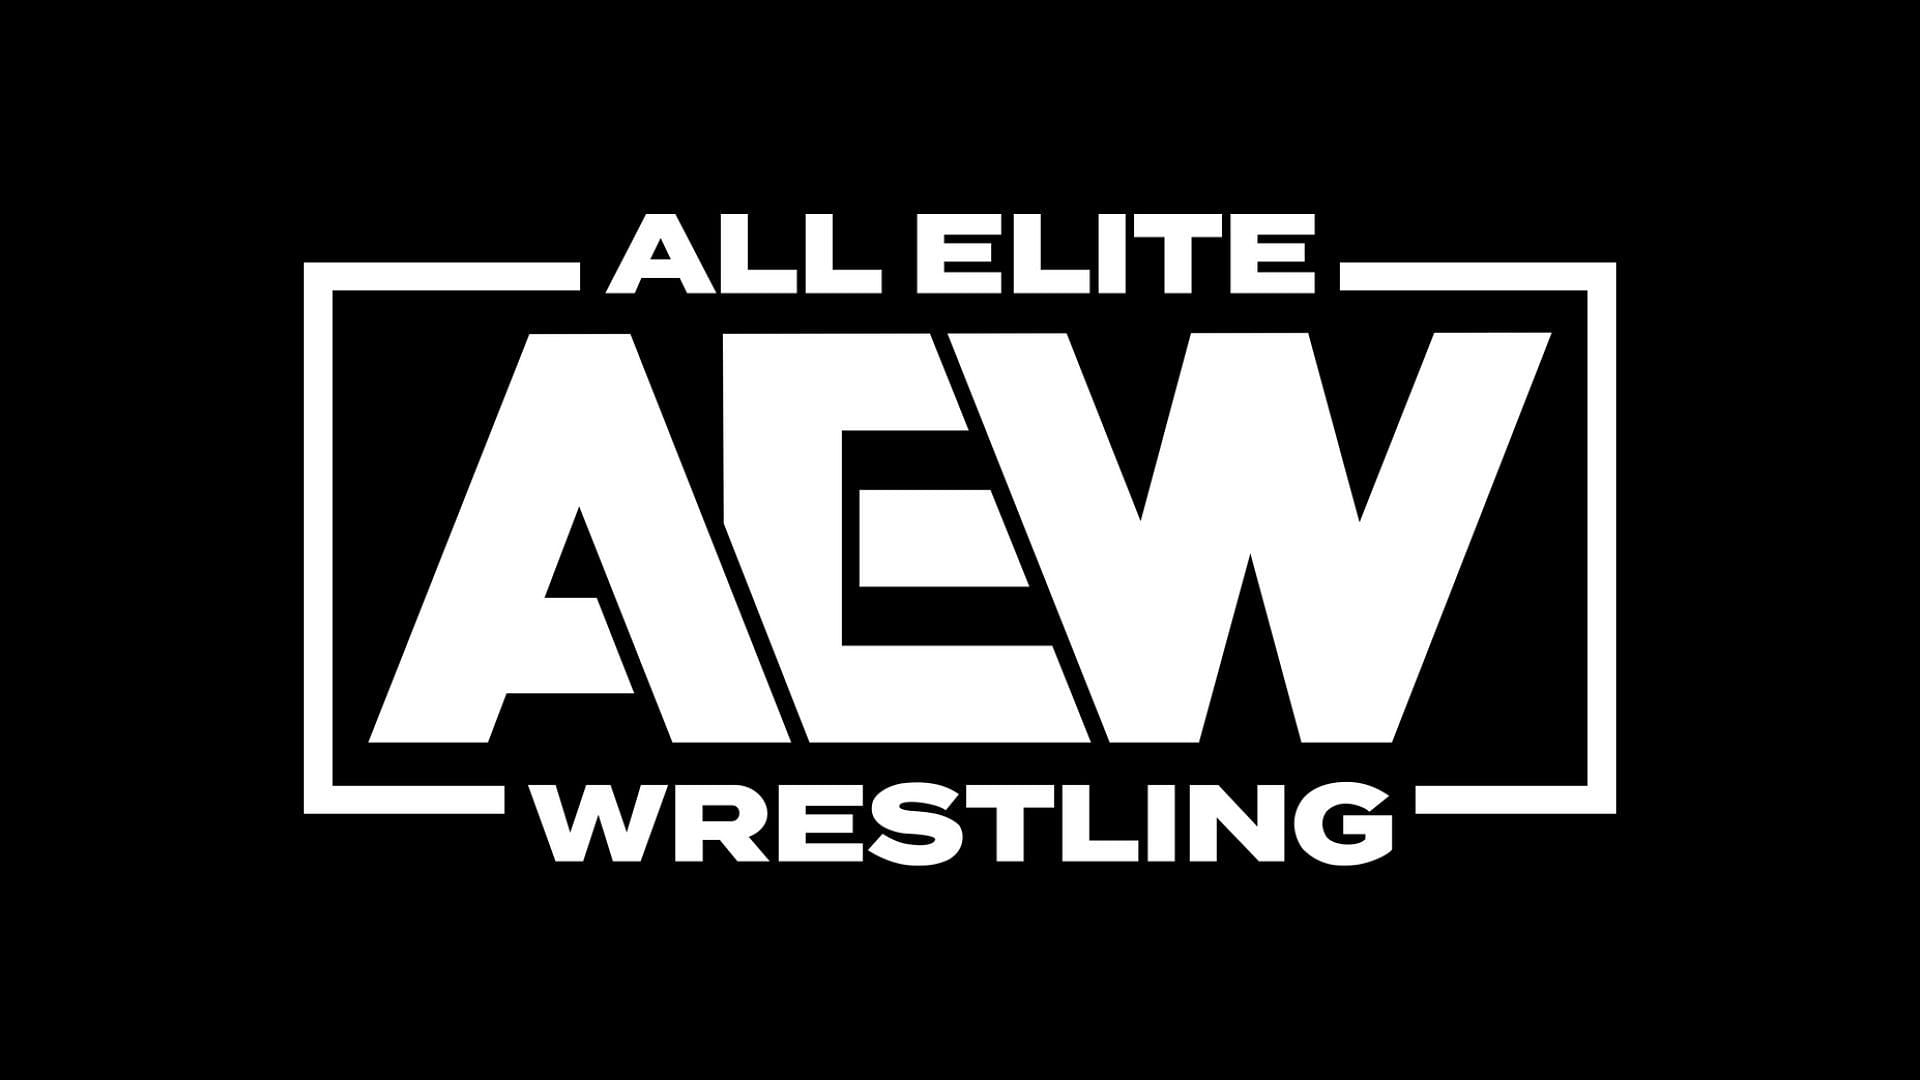 Has this star been released from All Elite Wrestling?